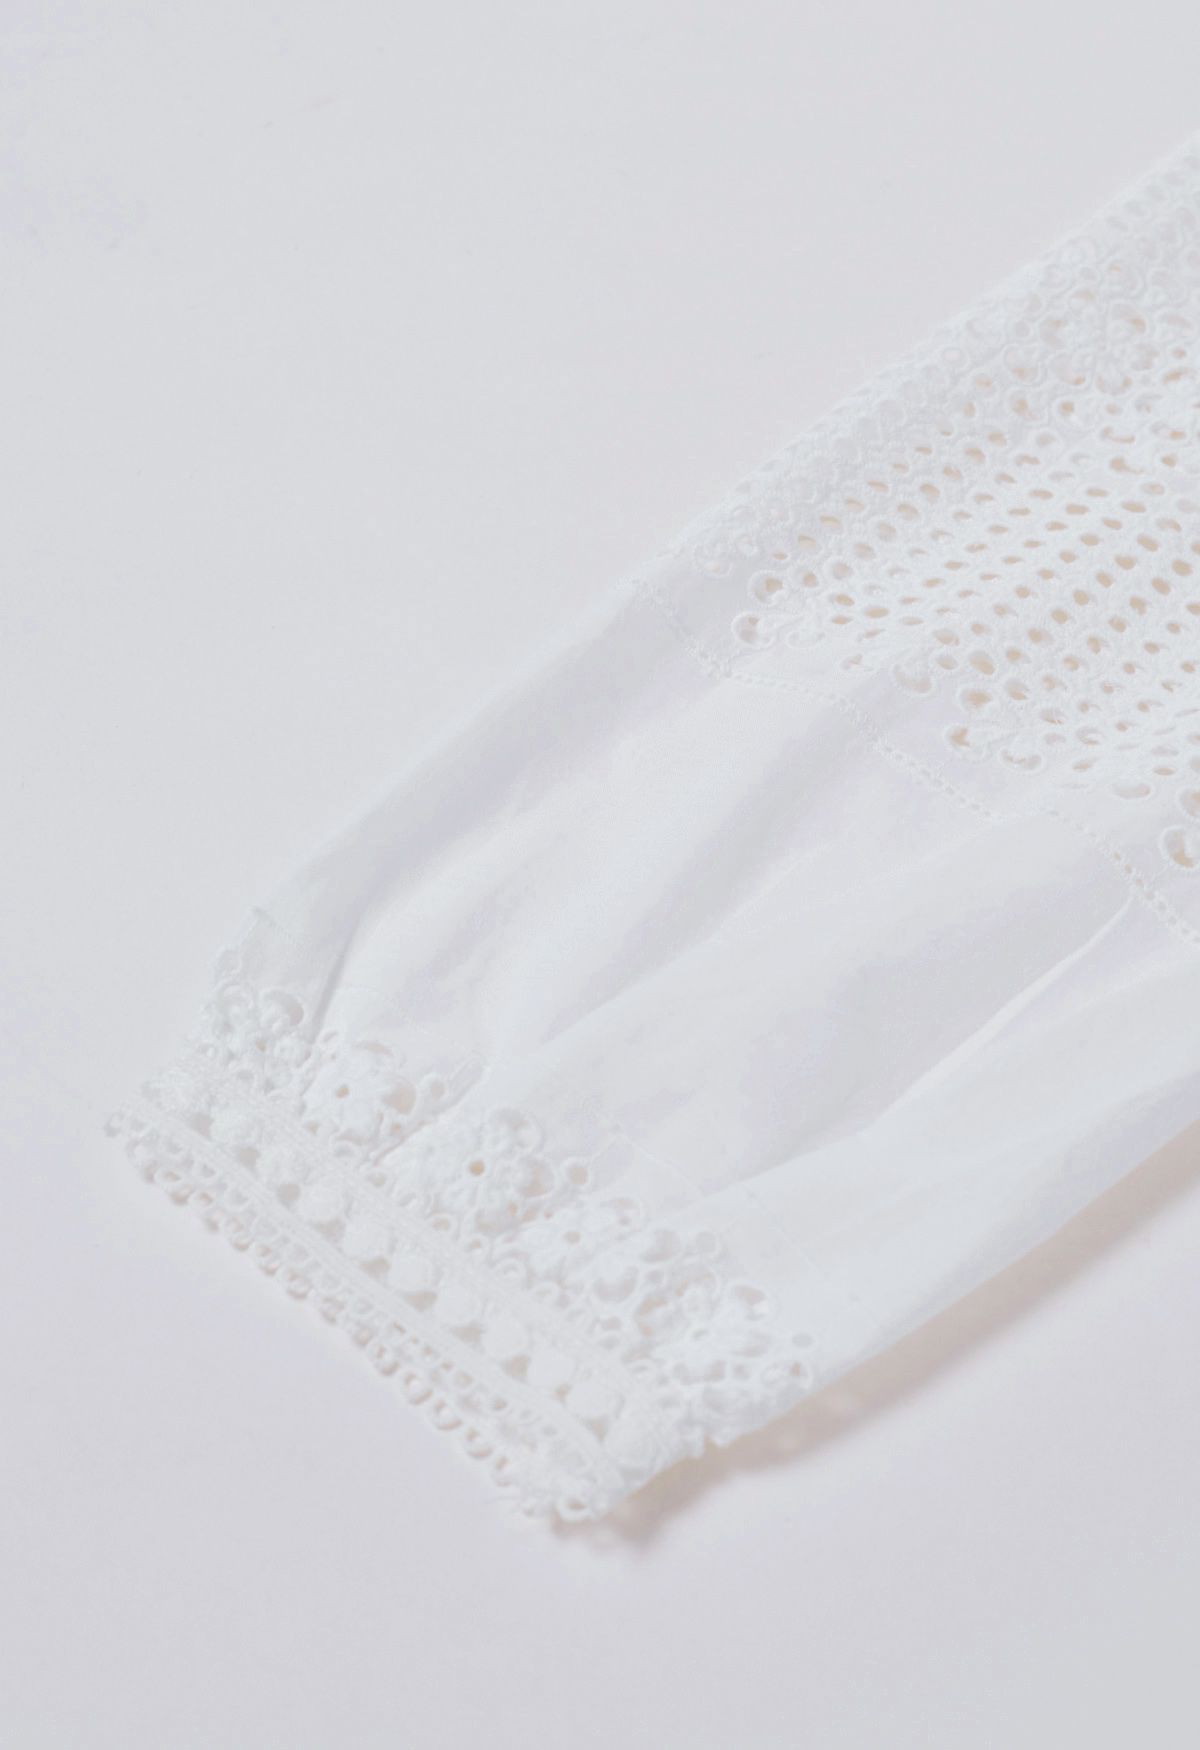 Boho Chic Eyelet Embroidered Cotton Top in White